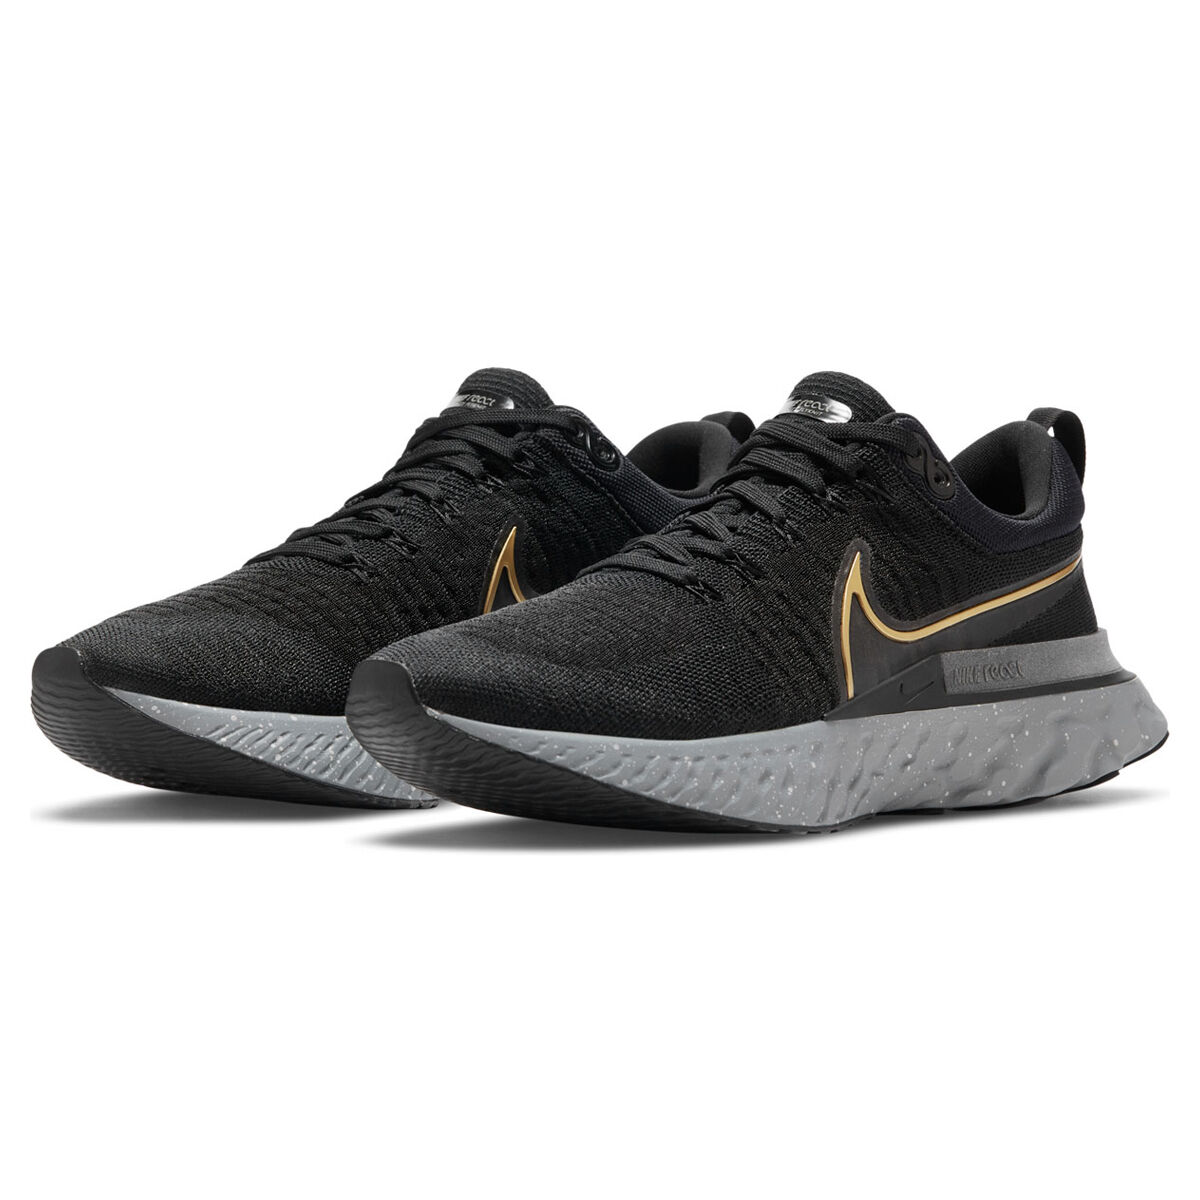 nike running legend react trainers in black and gold